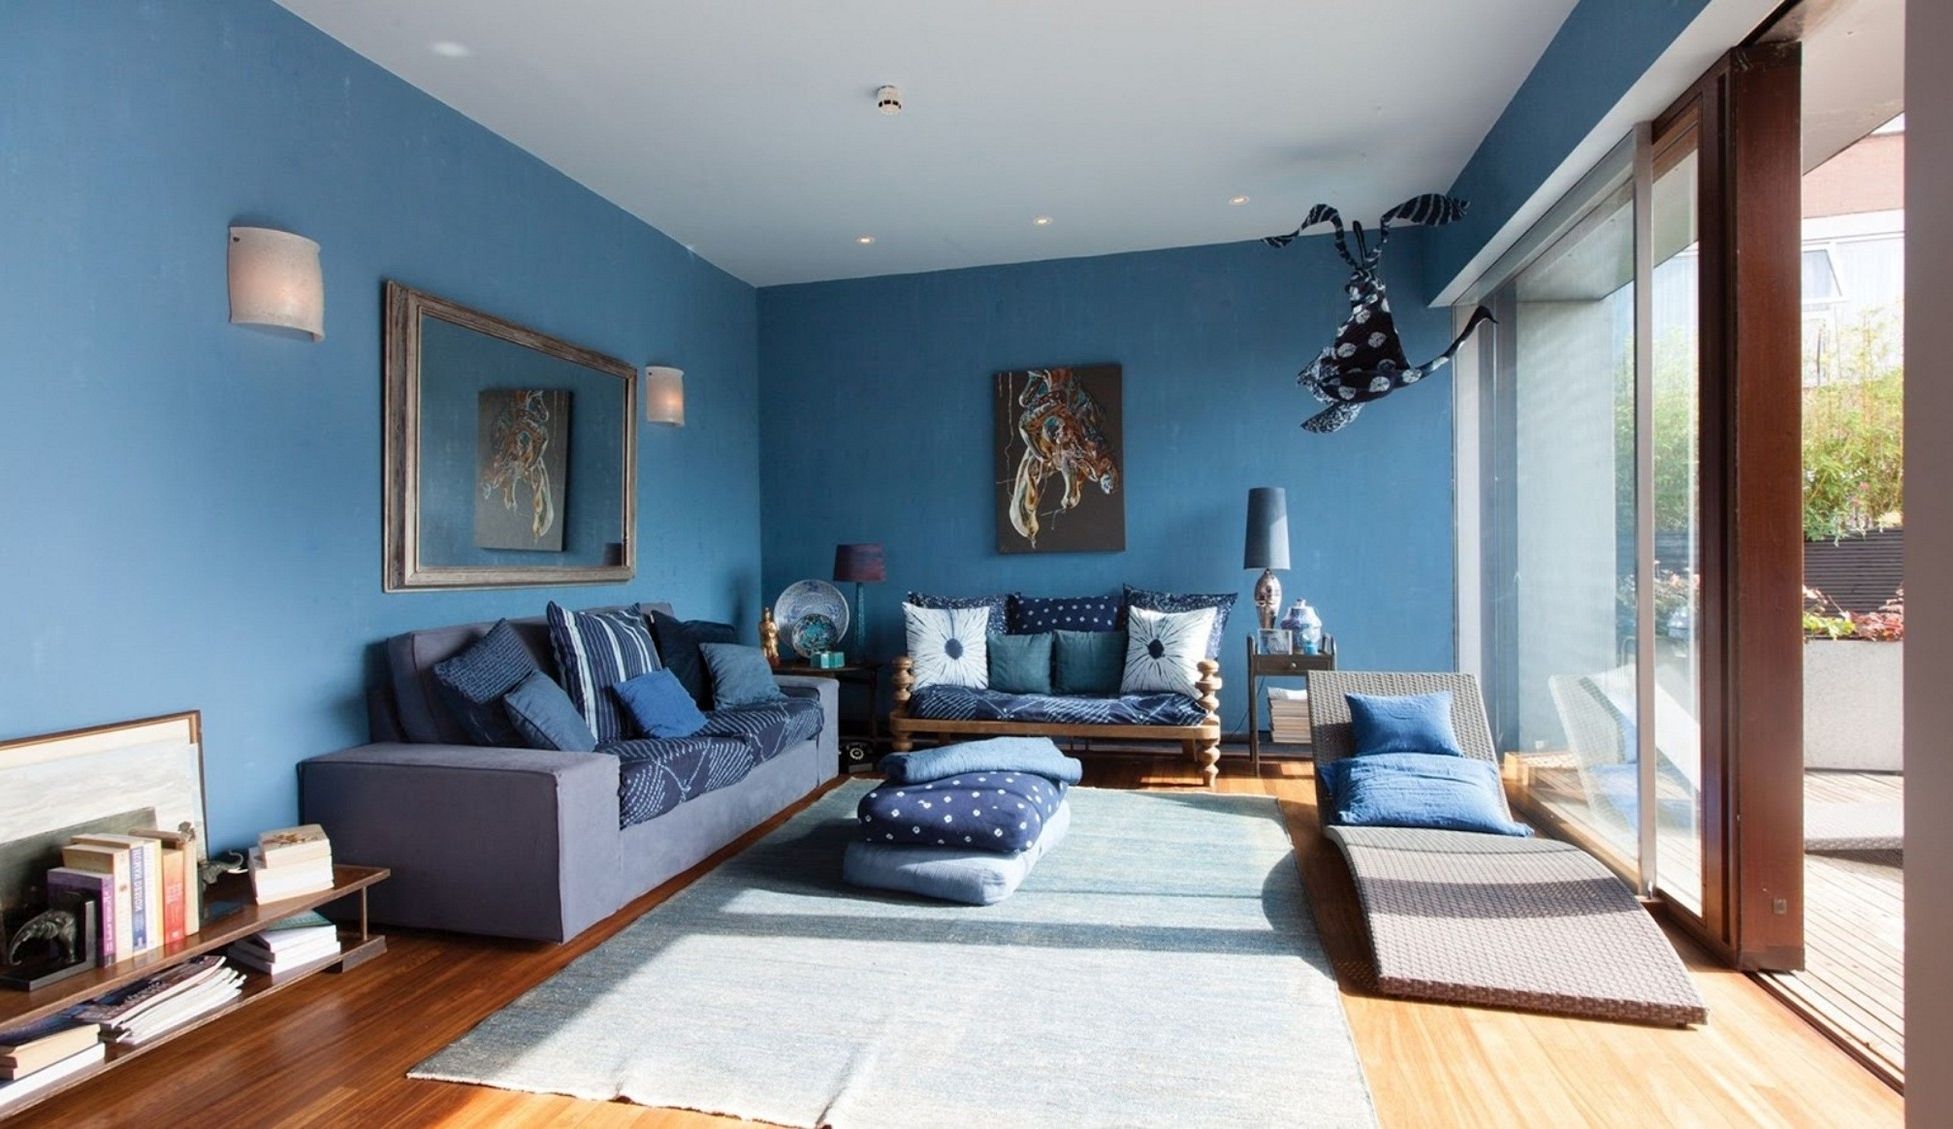 Light Blue Accent Walls In Living Room